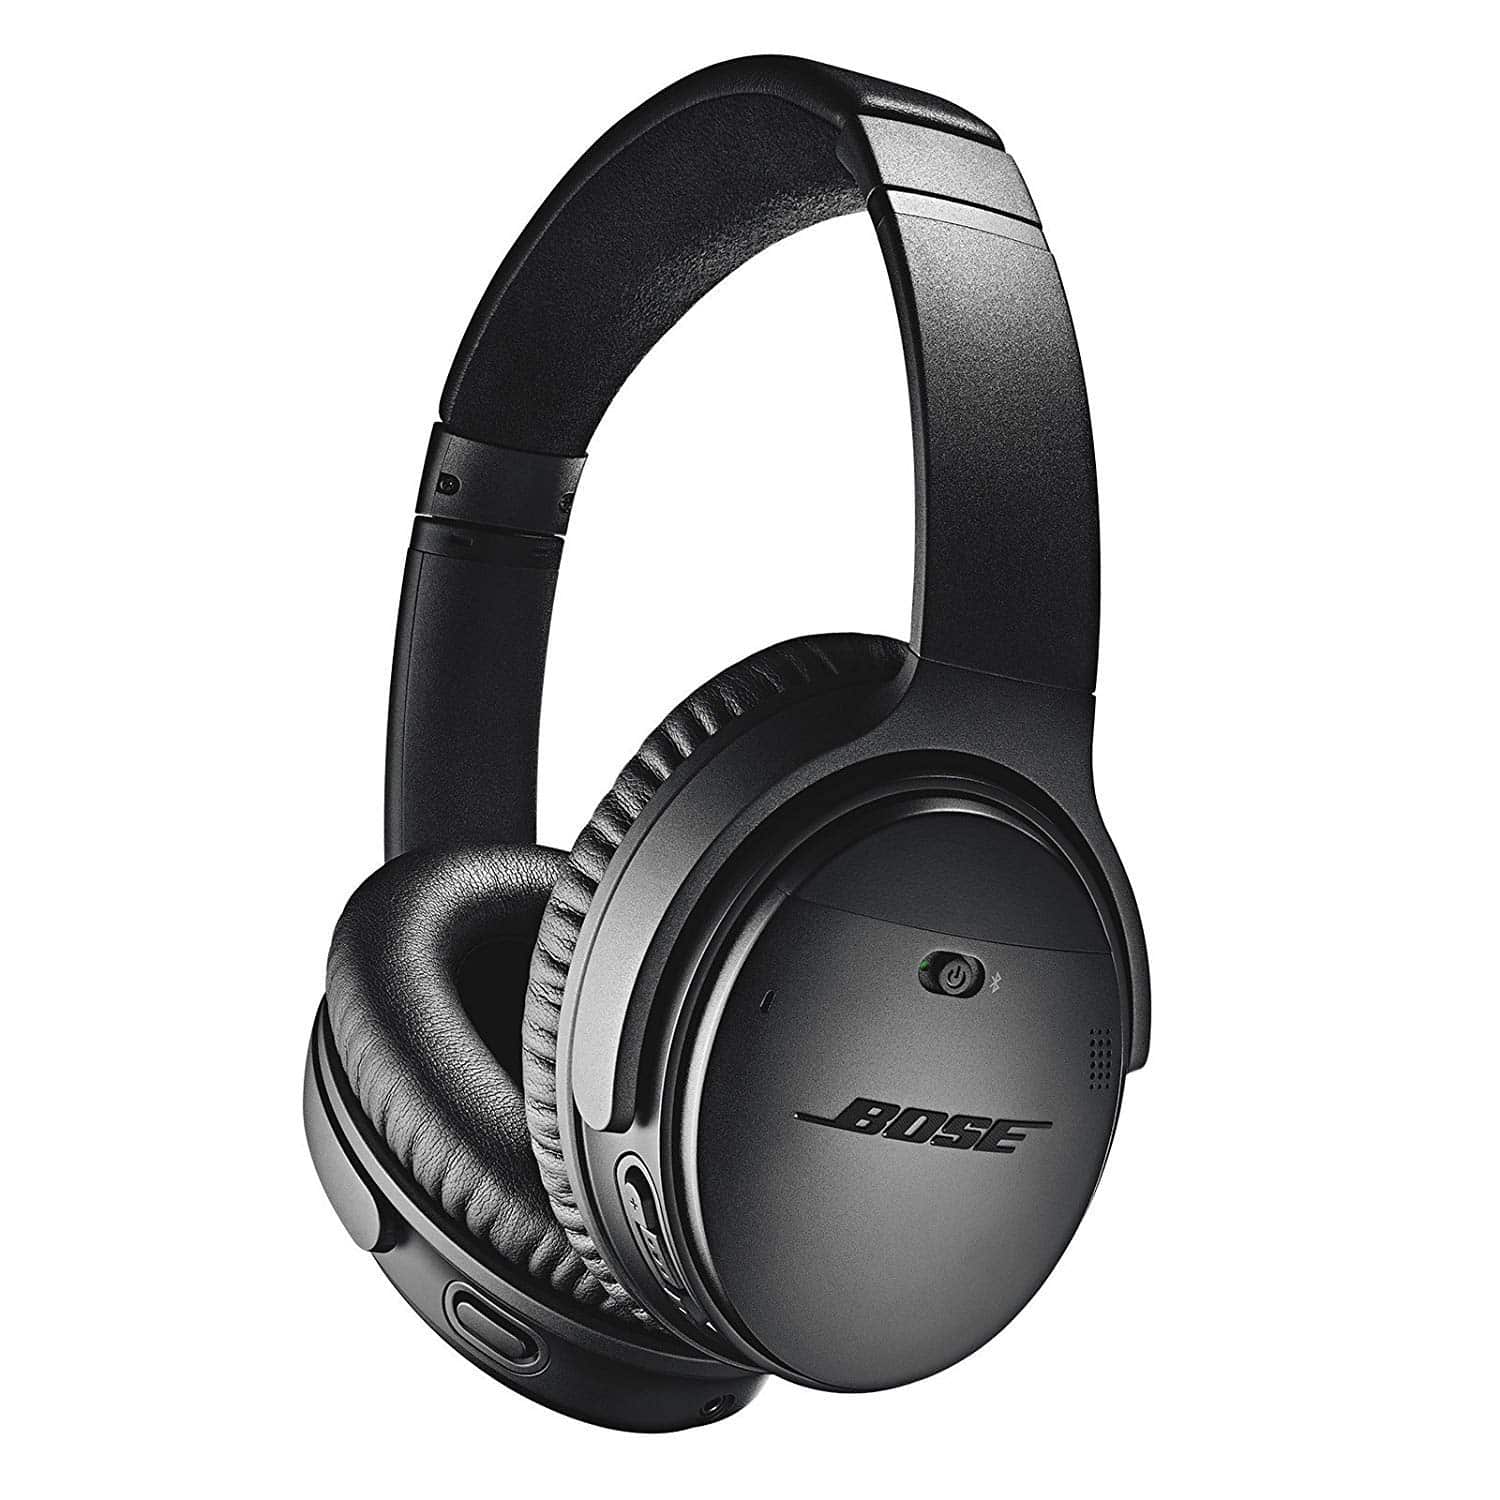 Cool Tech Gifts 2020: New Bose Wireless Noise Canceling Headphones 2020